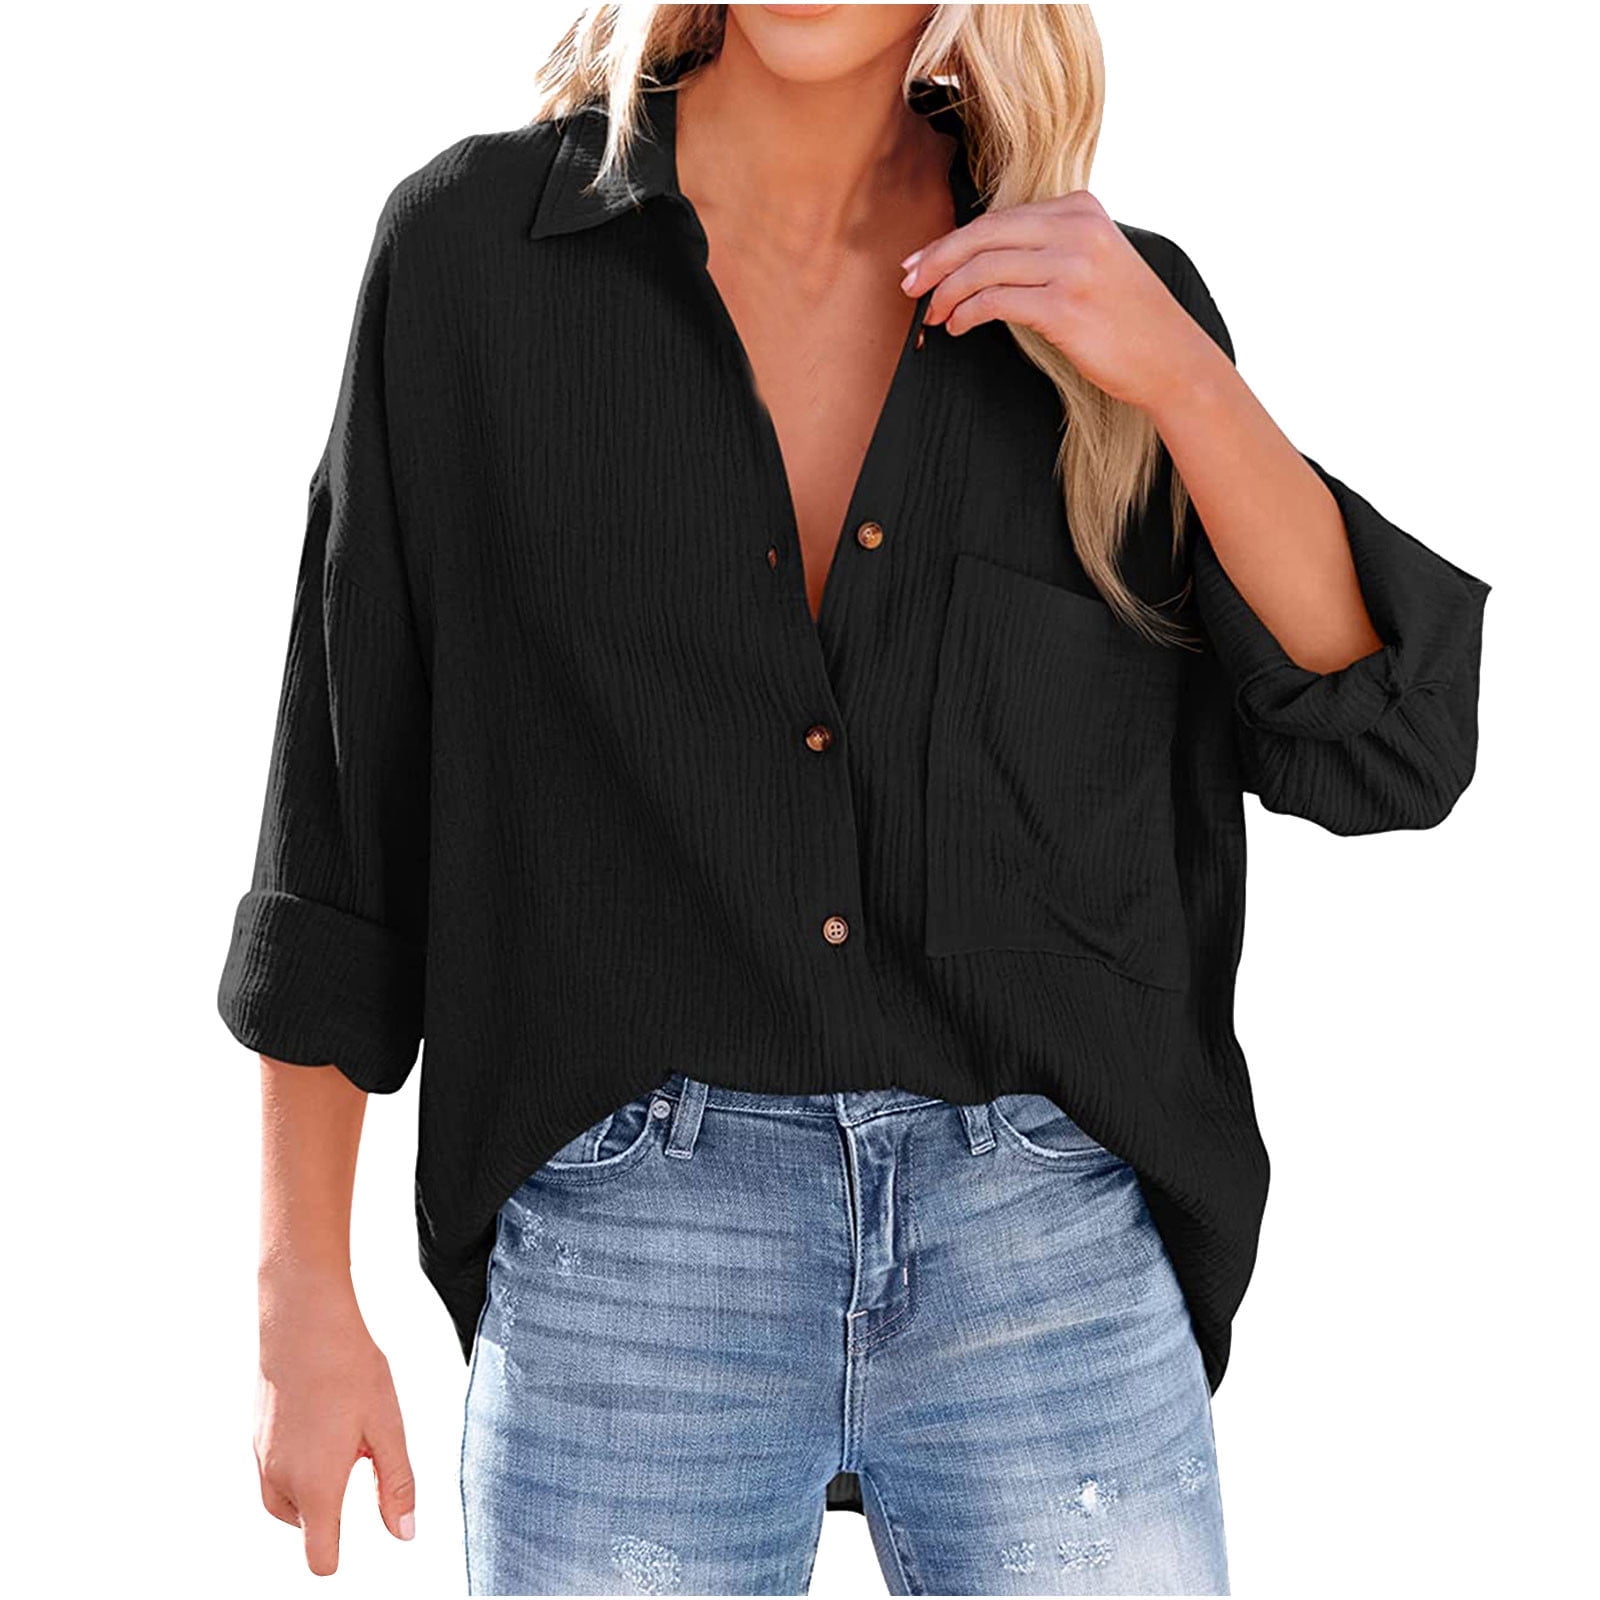 RYRJJ Womens Cotton Button Down Shirt Oversized Casual Long Sleeve Loose  Fit Collared Linen Work Blouse Tops with Pocket(Black,L) 